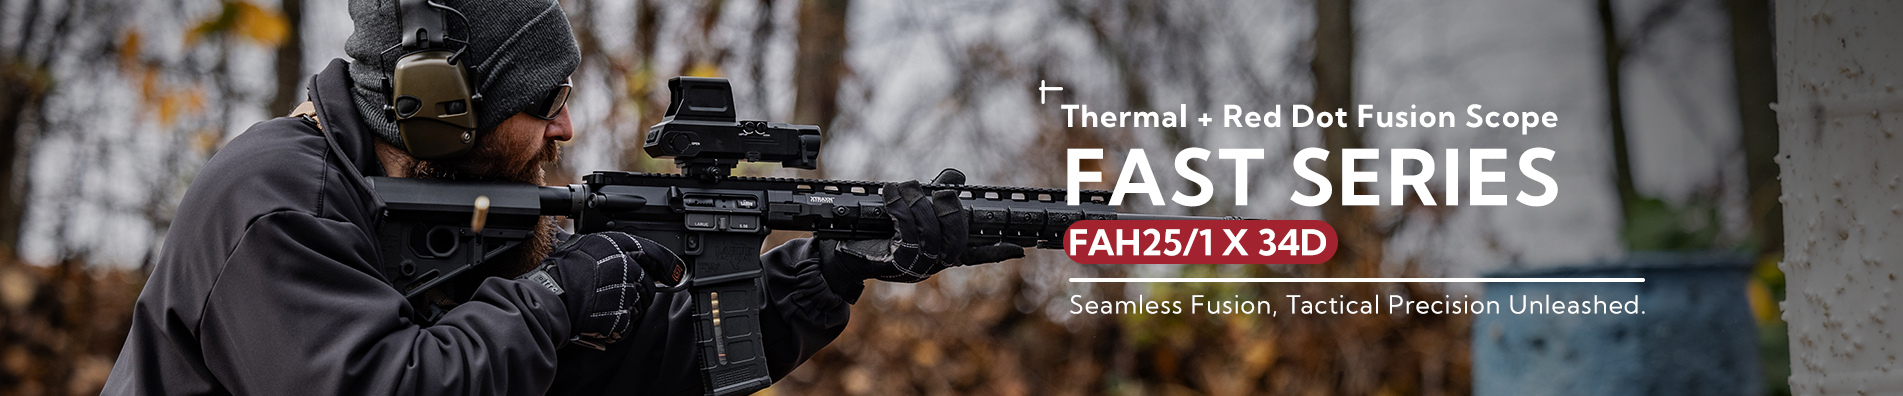 Thermal + Red Dot Fusion Scope Fast Series- FAH25/1 x 34D